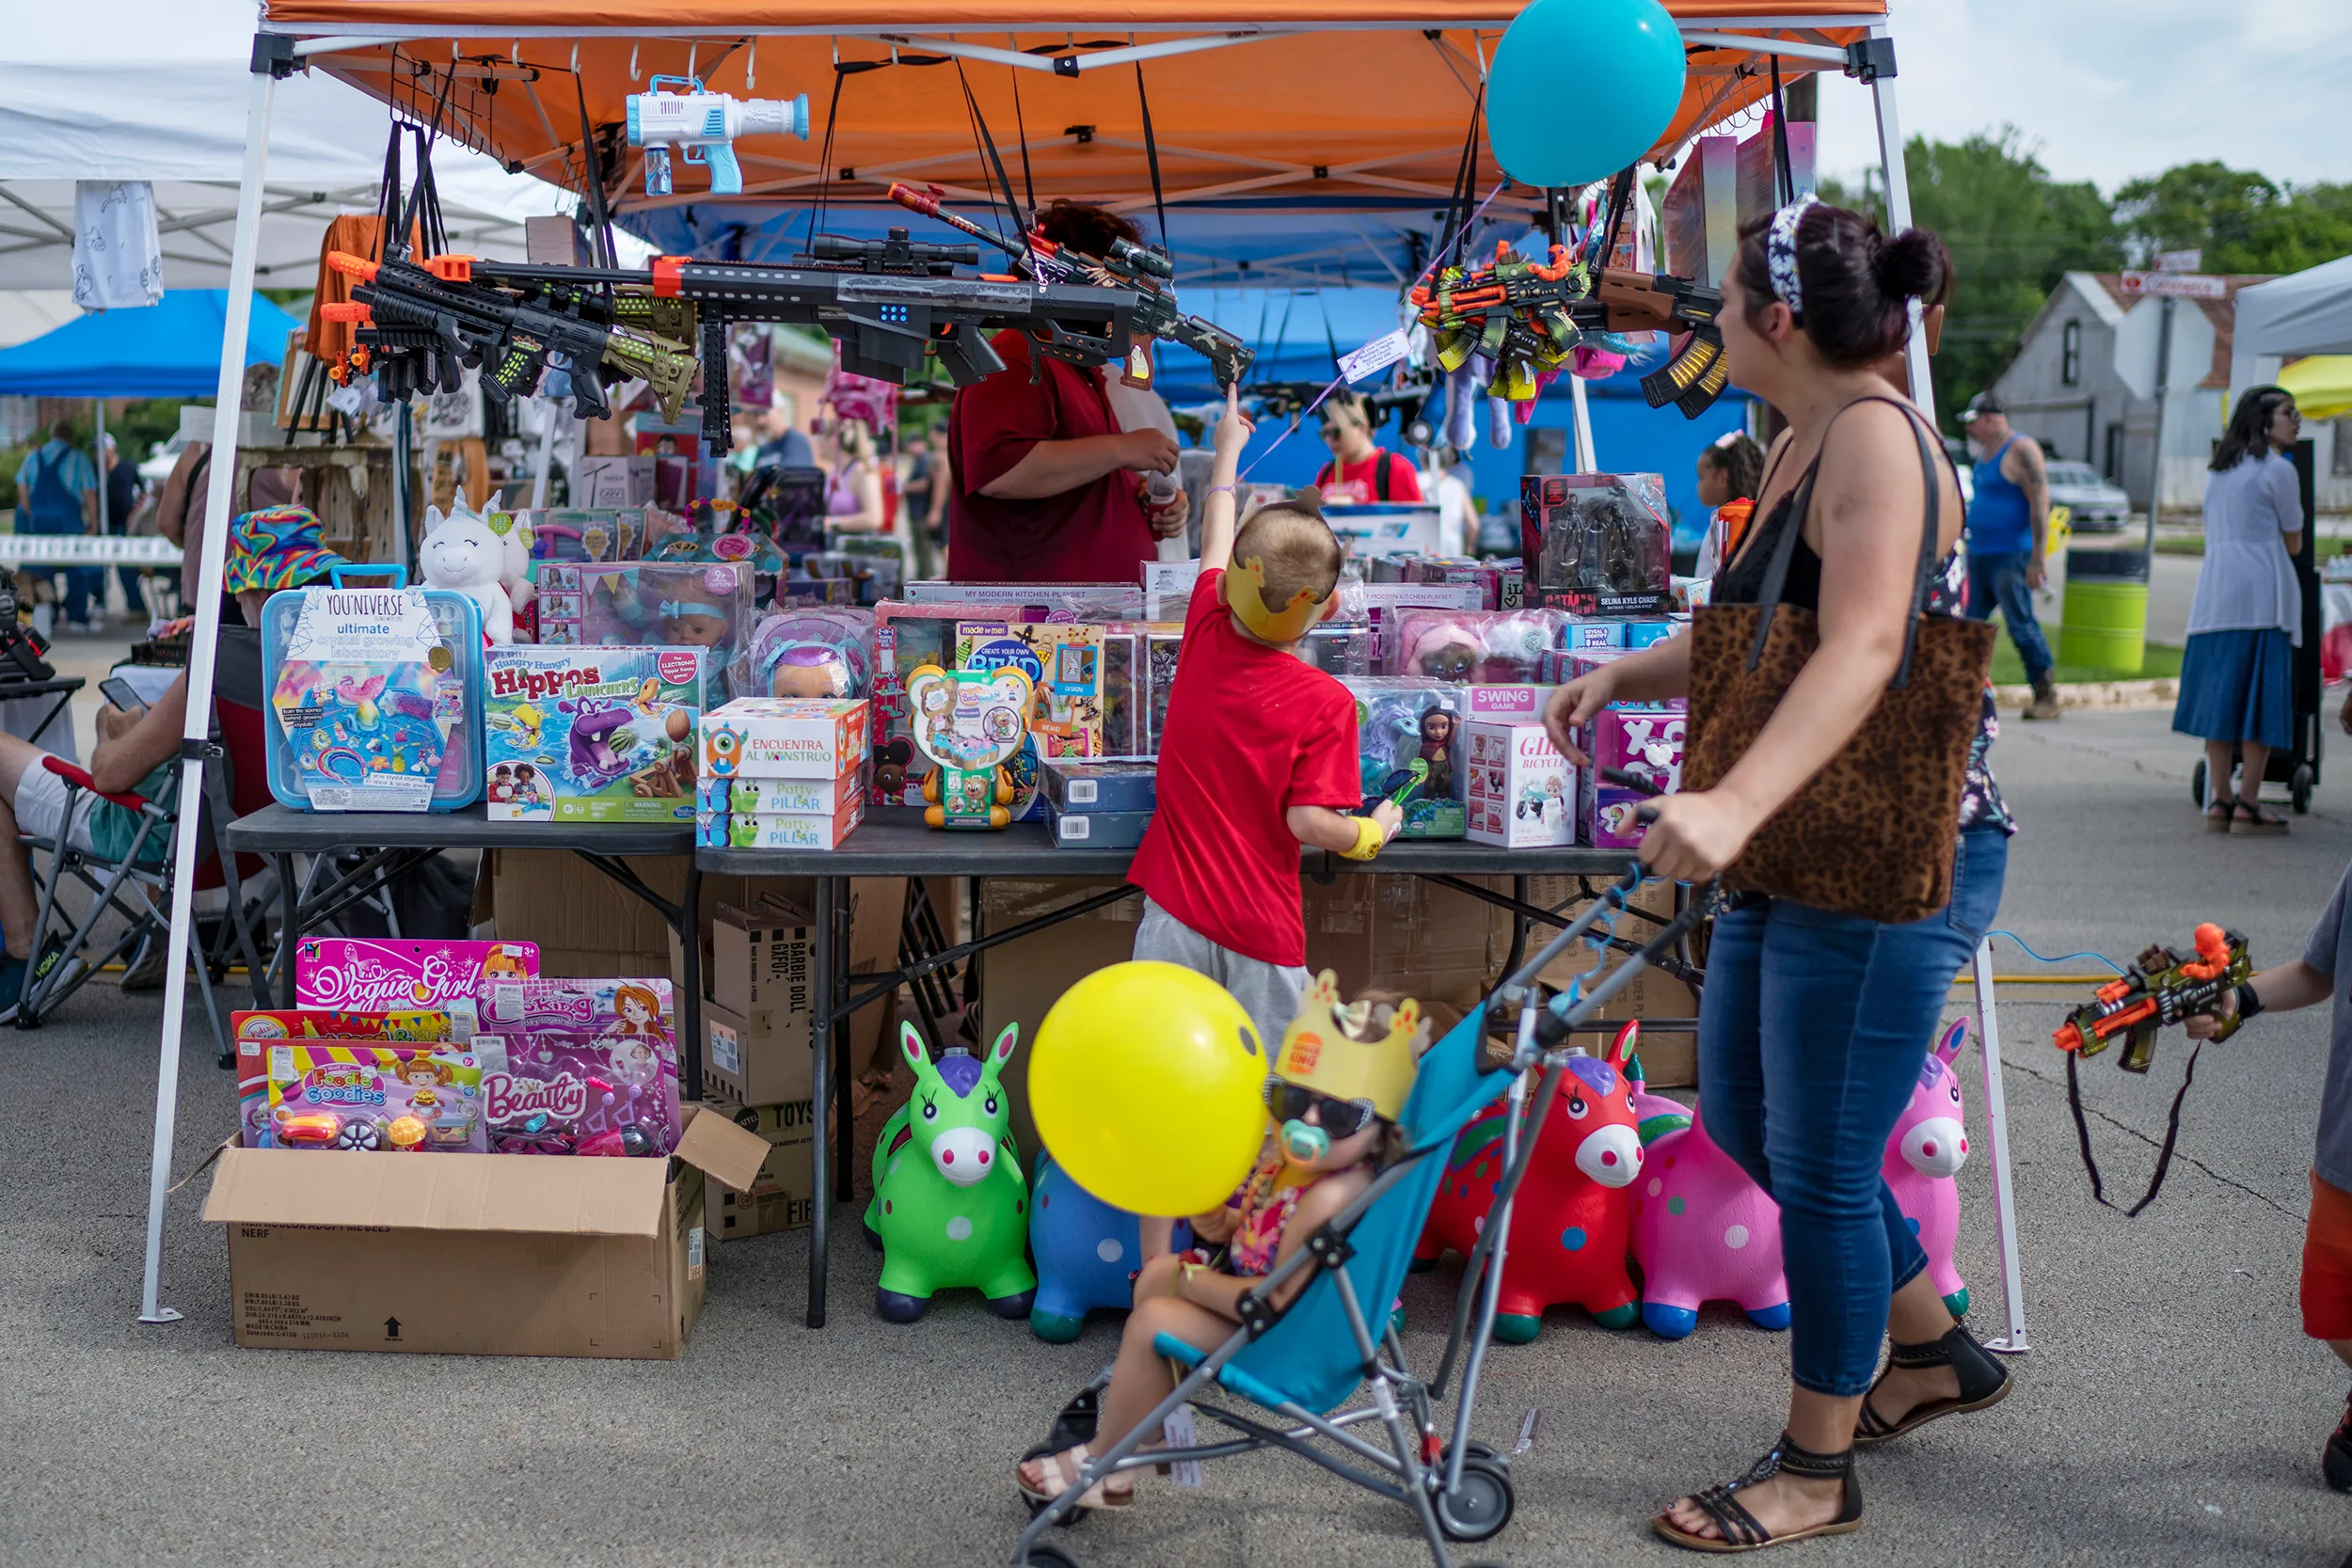 A fair stall with toys and a boy reaching for a toy machinegun.